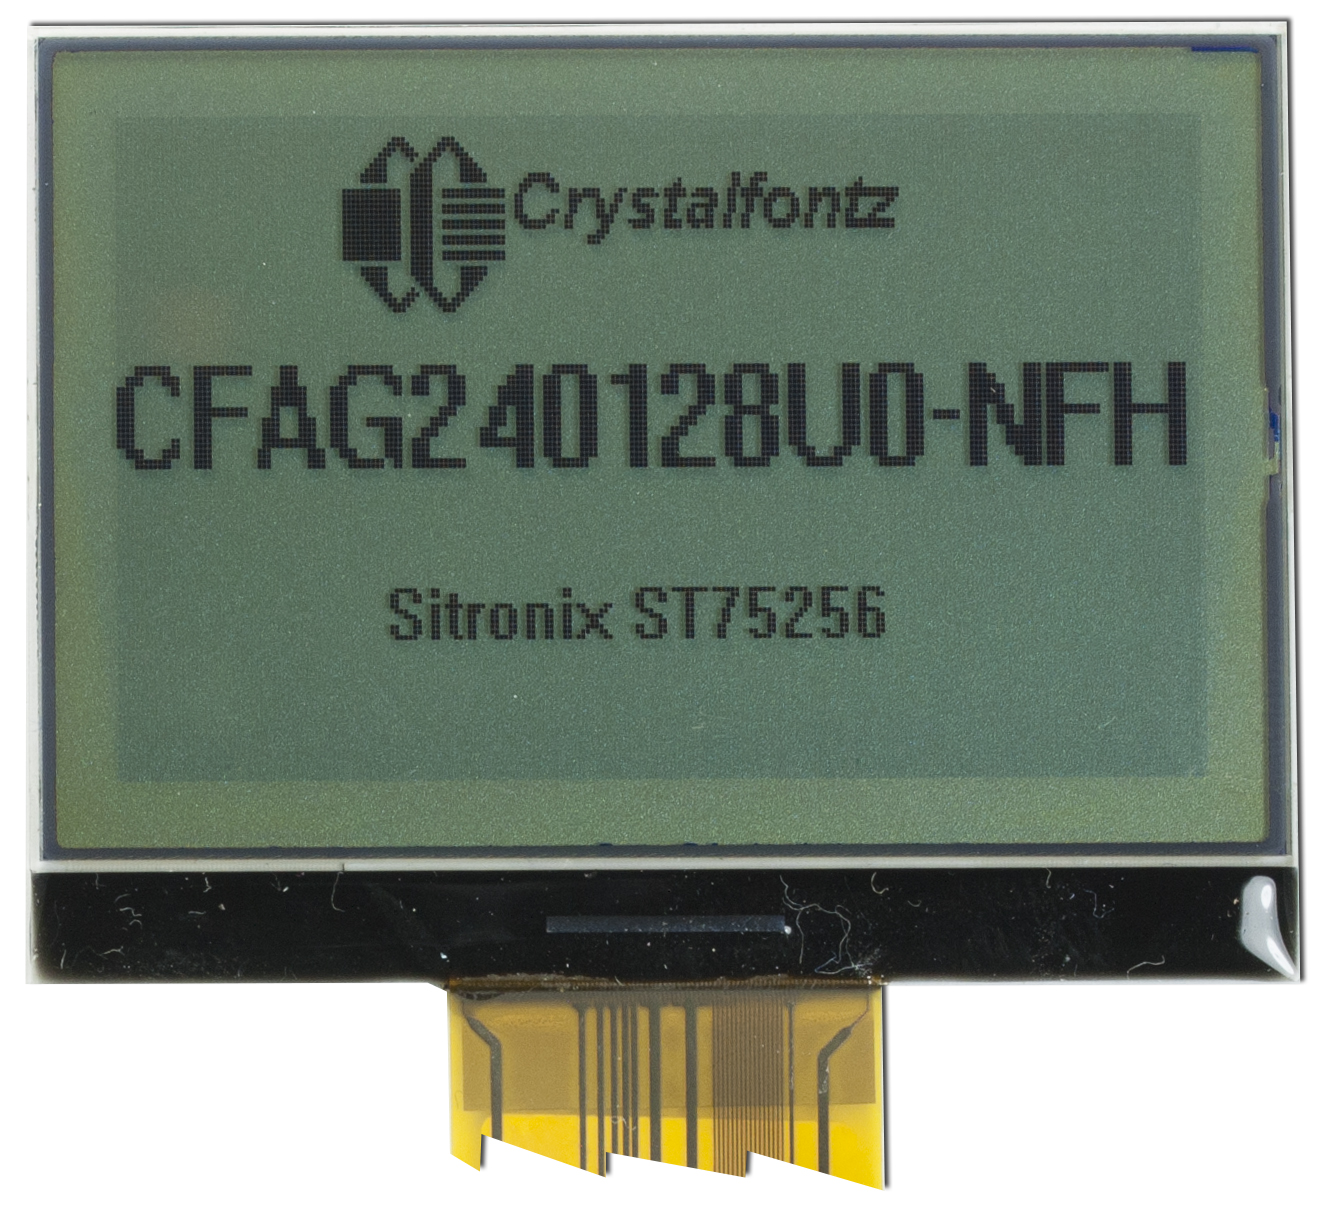 Low Power 240x128 Graphic LCD Display from Crystalfontz